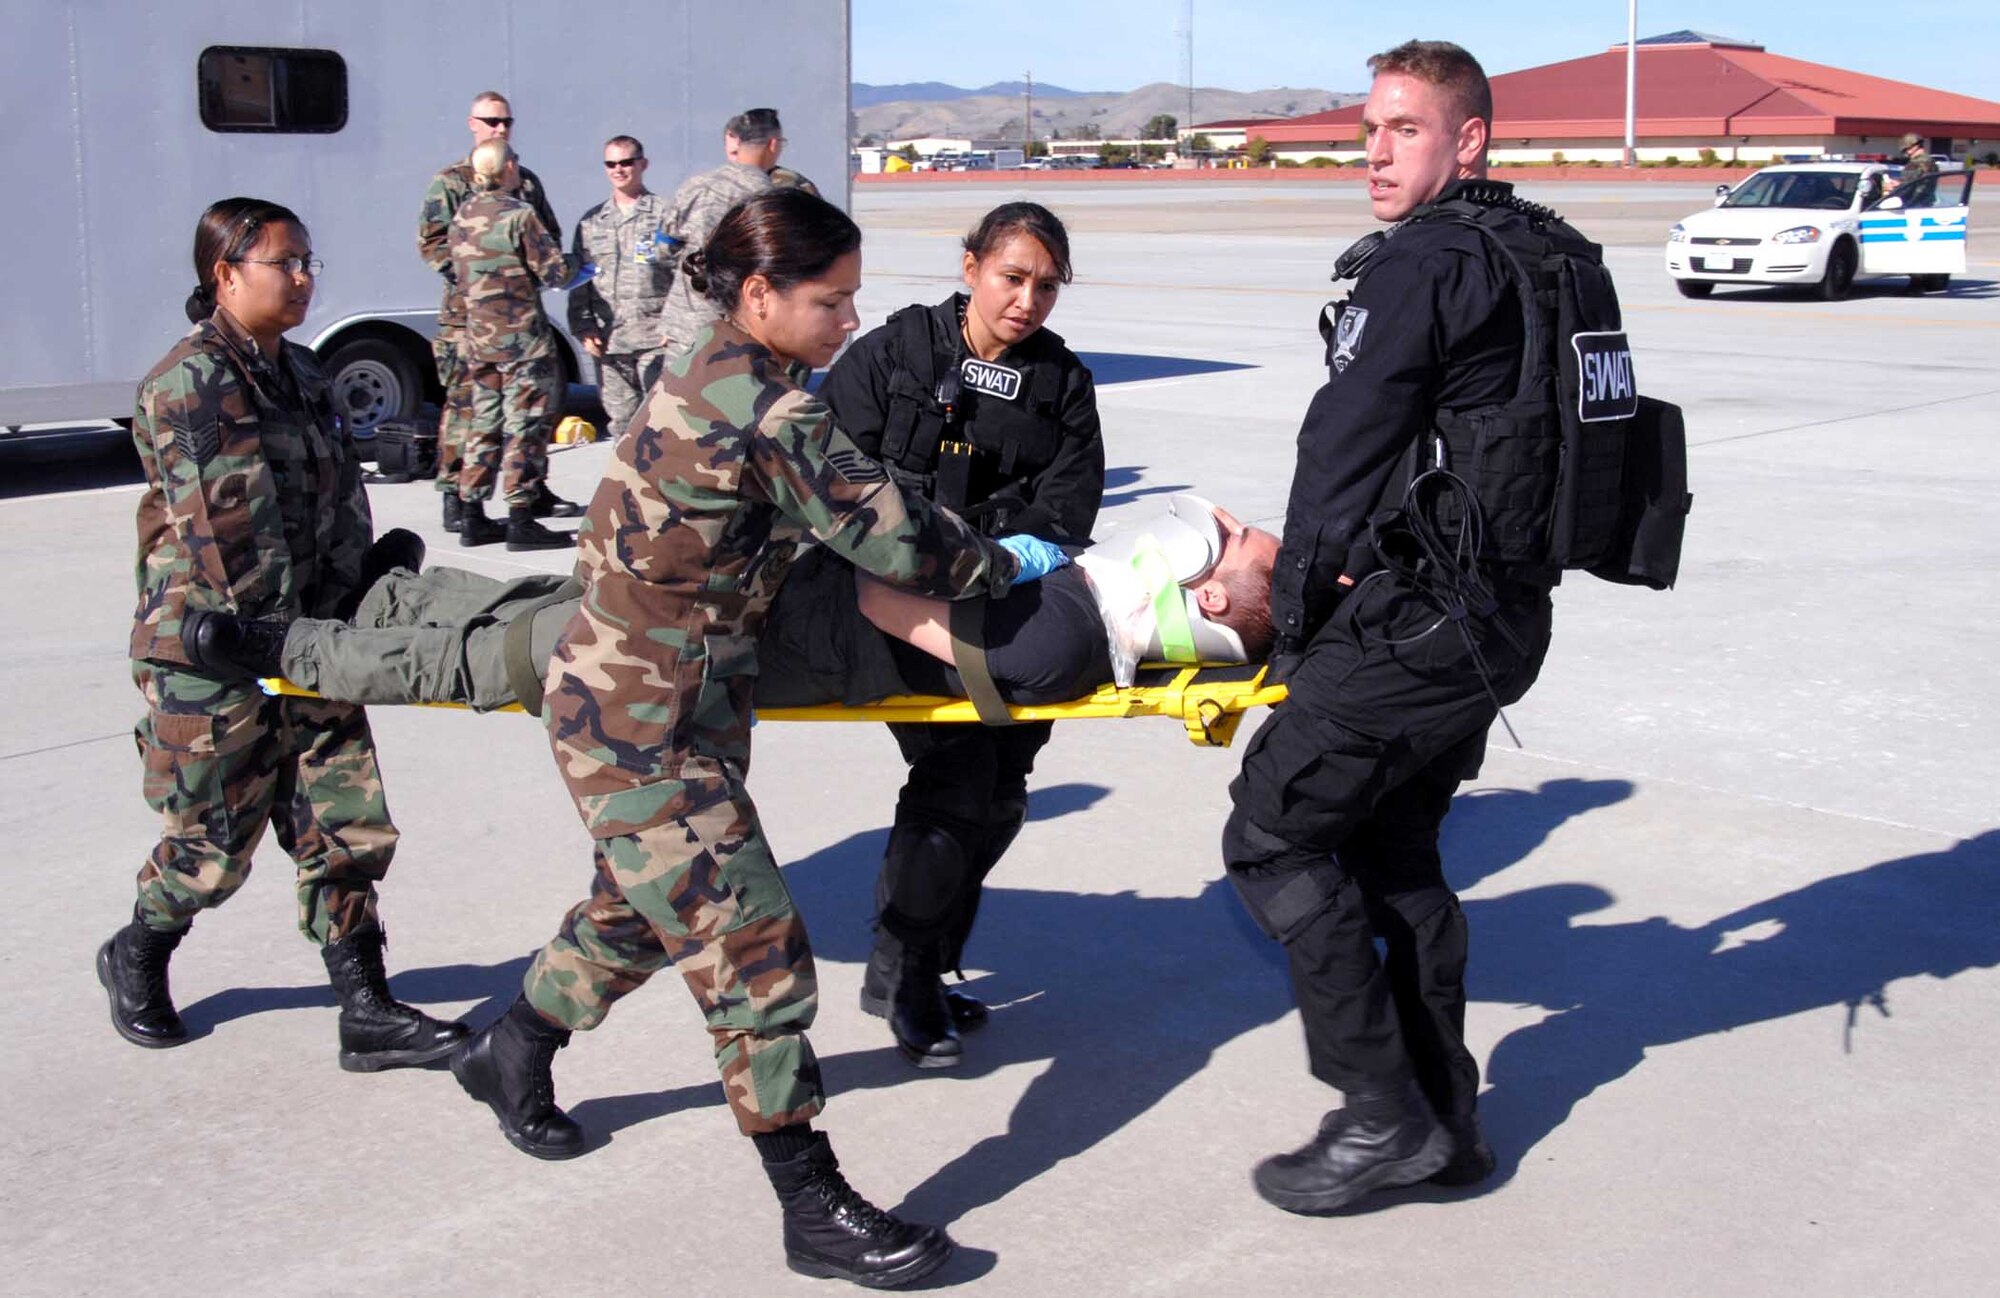 SWAT team members Staff Sgt. Sherry Brown (second from right) and Staff Sgt. William Kelly (far right) assist 60th Aerospace Medicine Squadron flight medicine personnel Master Sgt. Abigail Rivera (2nd from left), and Tech. Sgt. Kristine Valeros (far left) carry simulated gunshot victim Airman 1st Class Kyle Curry, 21st Airlift Squadron to an awaiting ambulance. The simulation was part of the Home Station Attack Response Exercise Nov. 14. (U.S. Air Force photo)